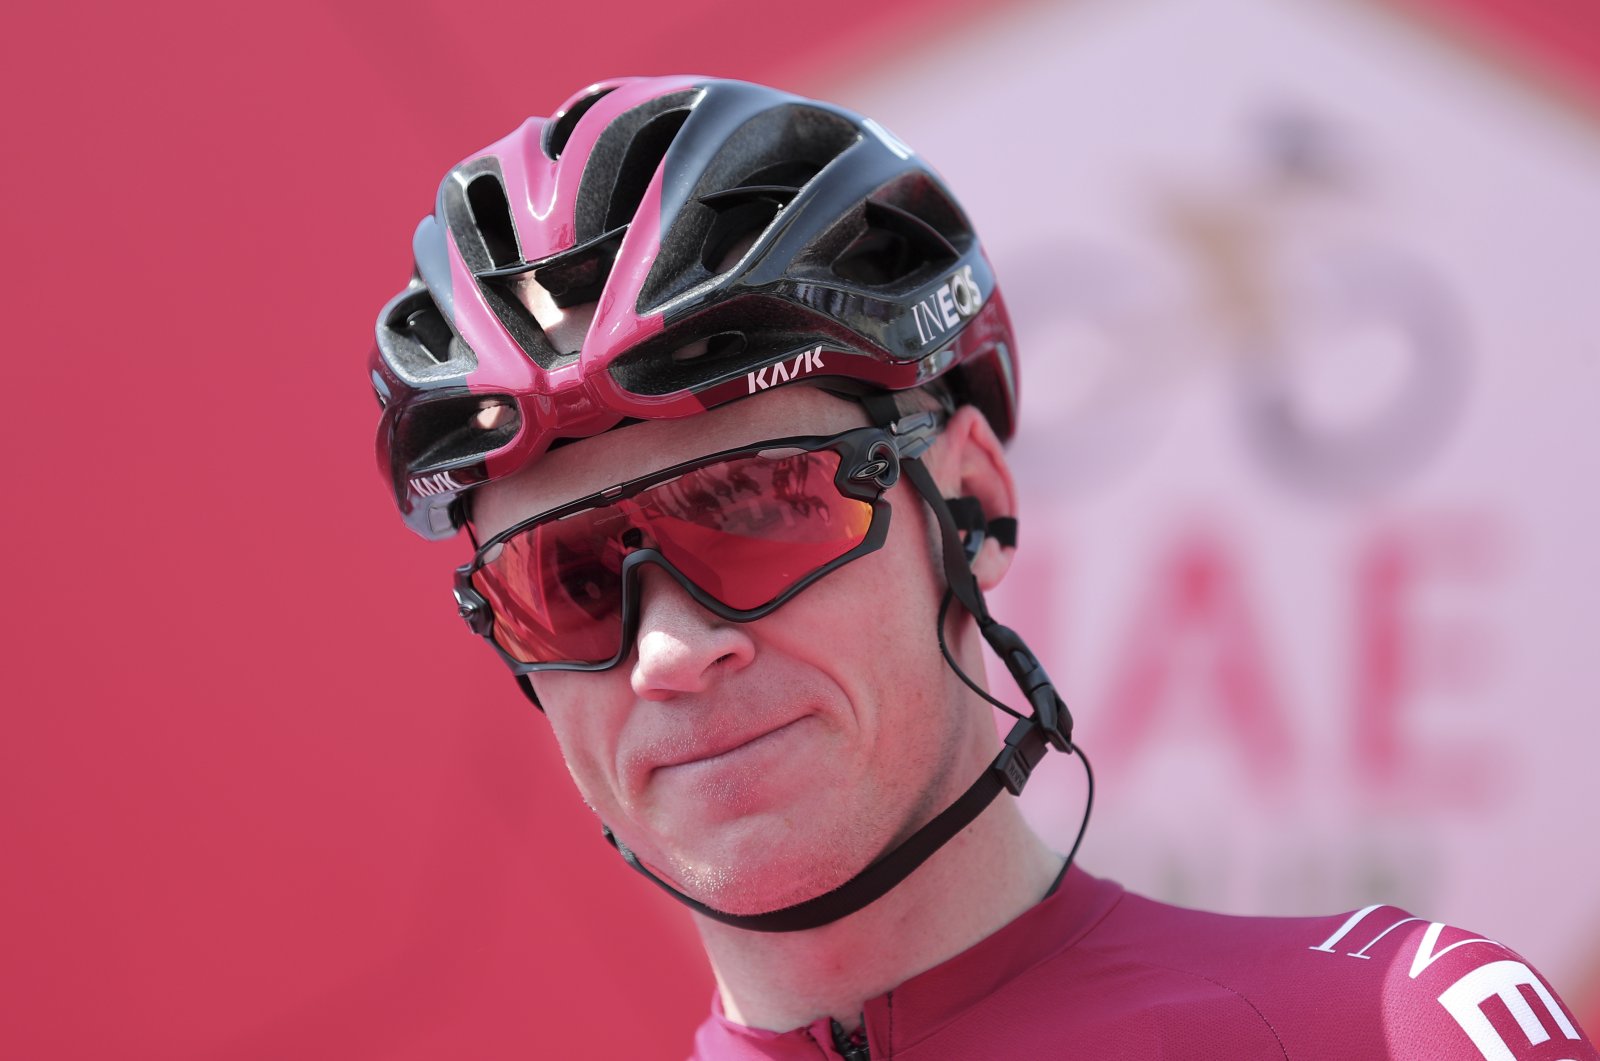 Chris Froome during a cycling tour in Dubai, United Arab Emirates, Feb, 23, 2020. (AP Photo)